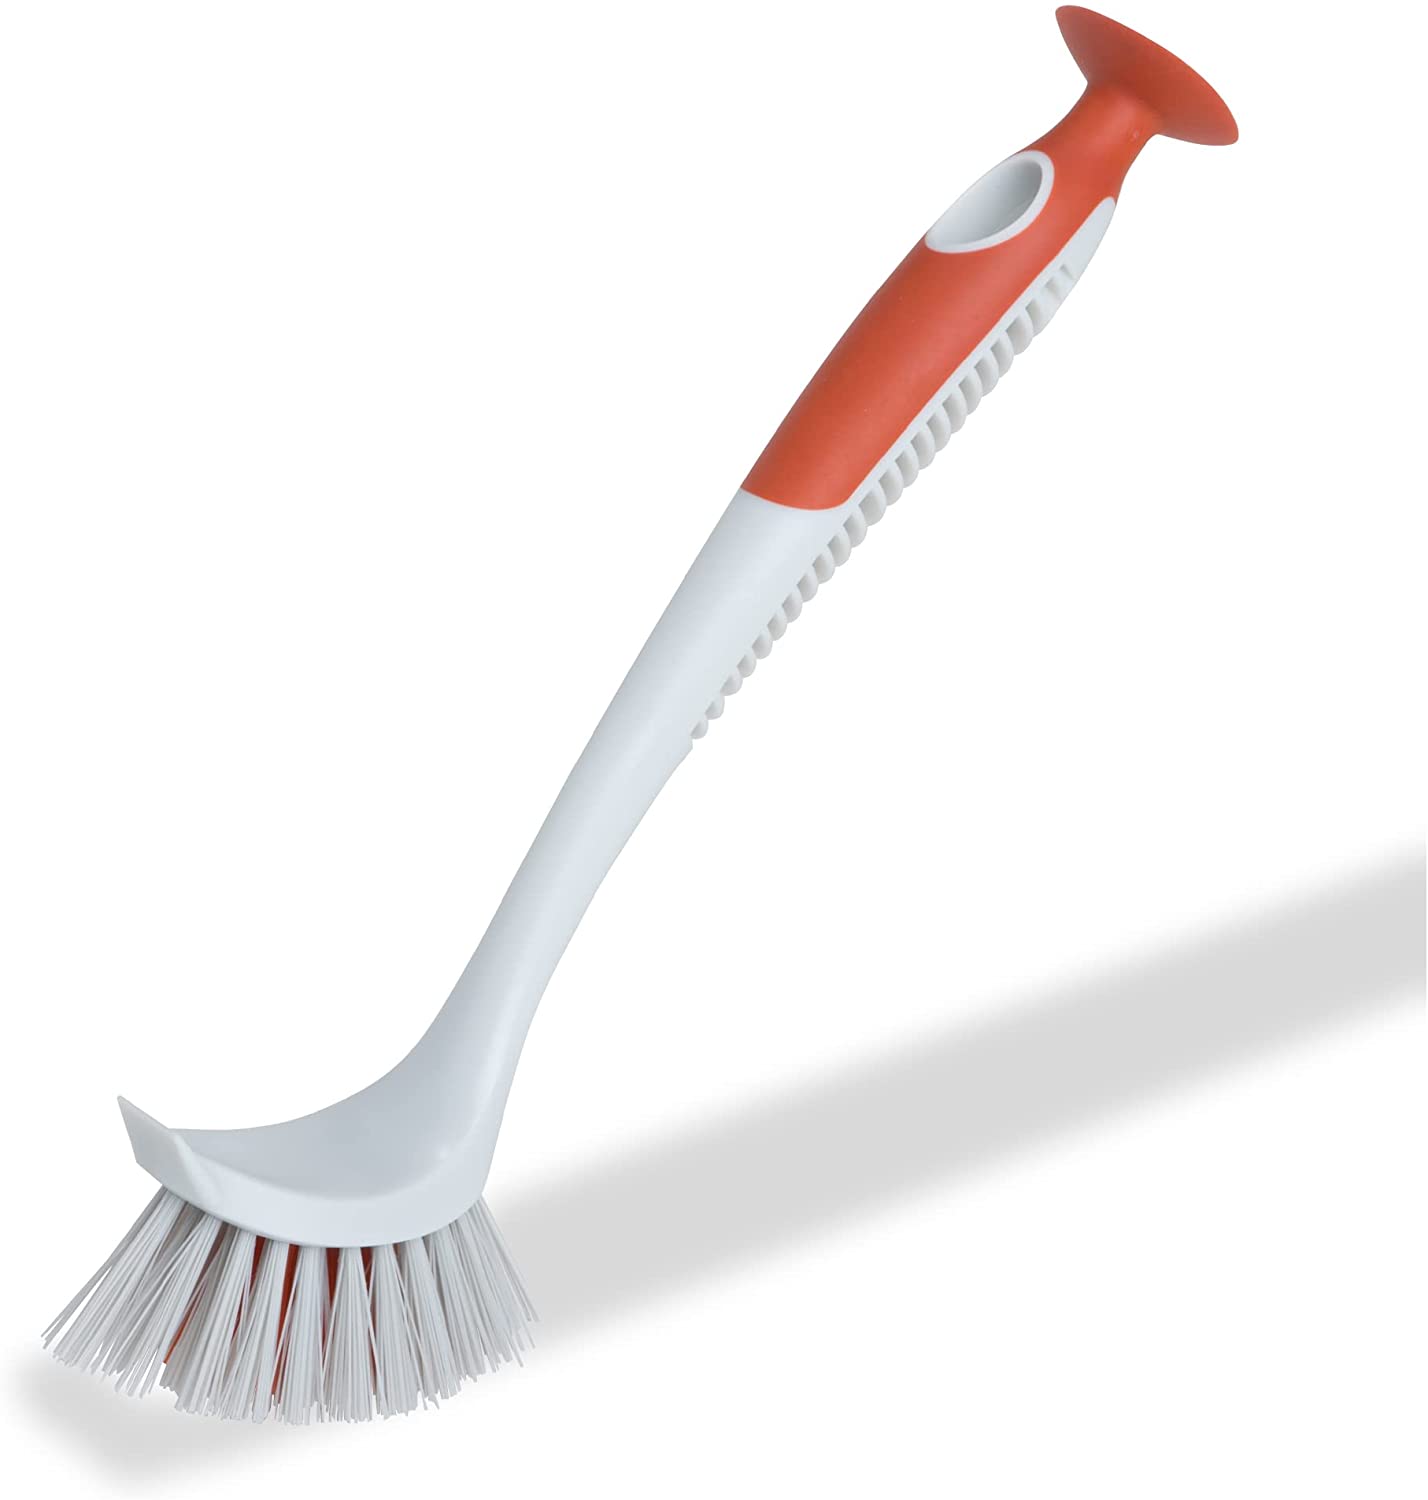 https://cdn.shopify.com/s/files/1/2393/7799/products/scrub-brush-with-suction-handle-105-x-2-x-275-inches-smart-design-cleaning-7001521-incrementing-number-201220.jpg?v=1679337278